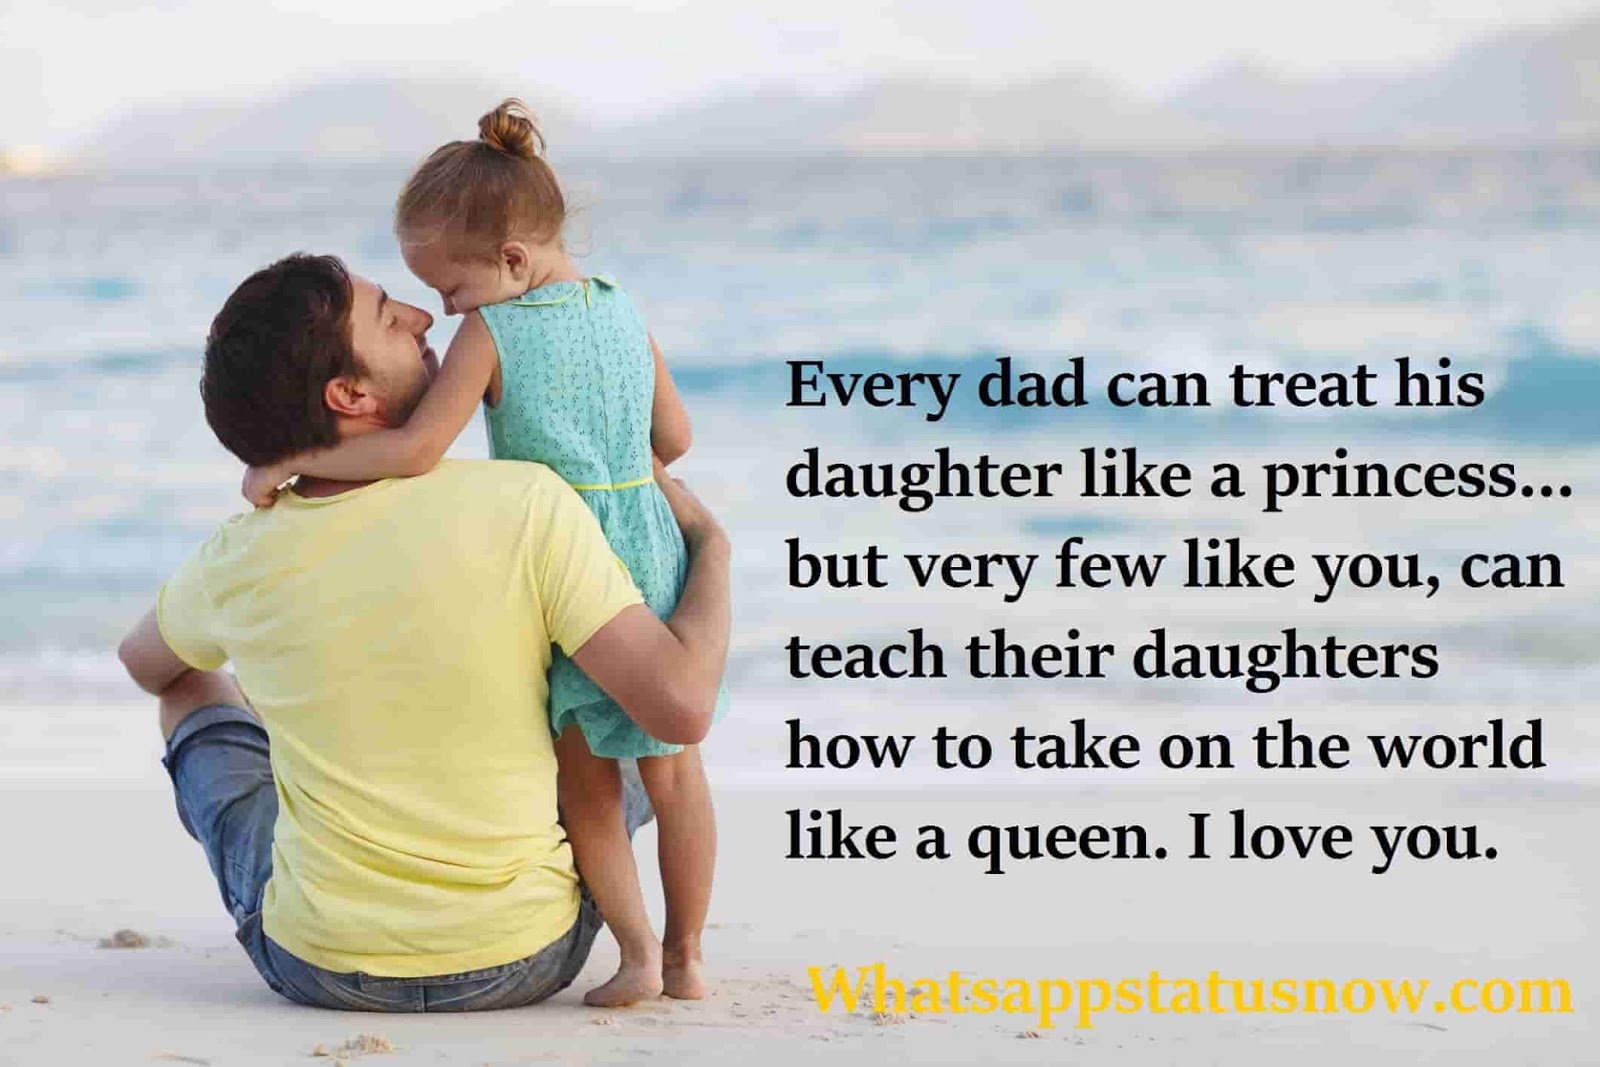 His loving daughter. Fathers Love quotes. Fathers and daughter Love quotes. Fathers' Love his daughters. My beloved daughter картинка.